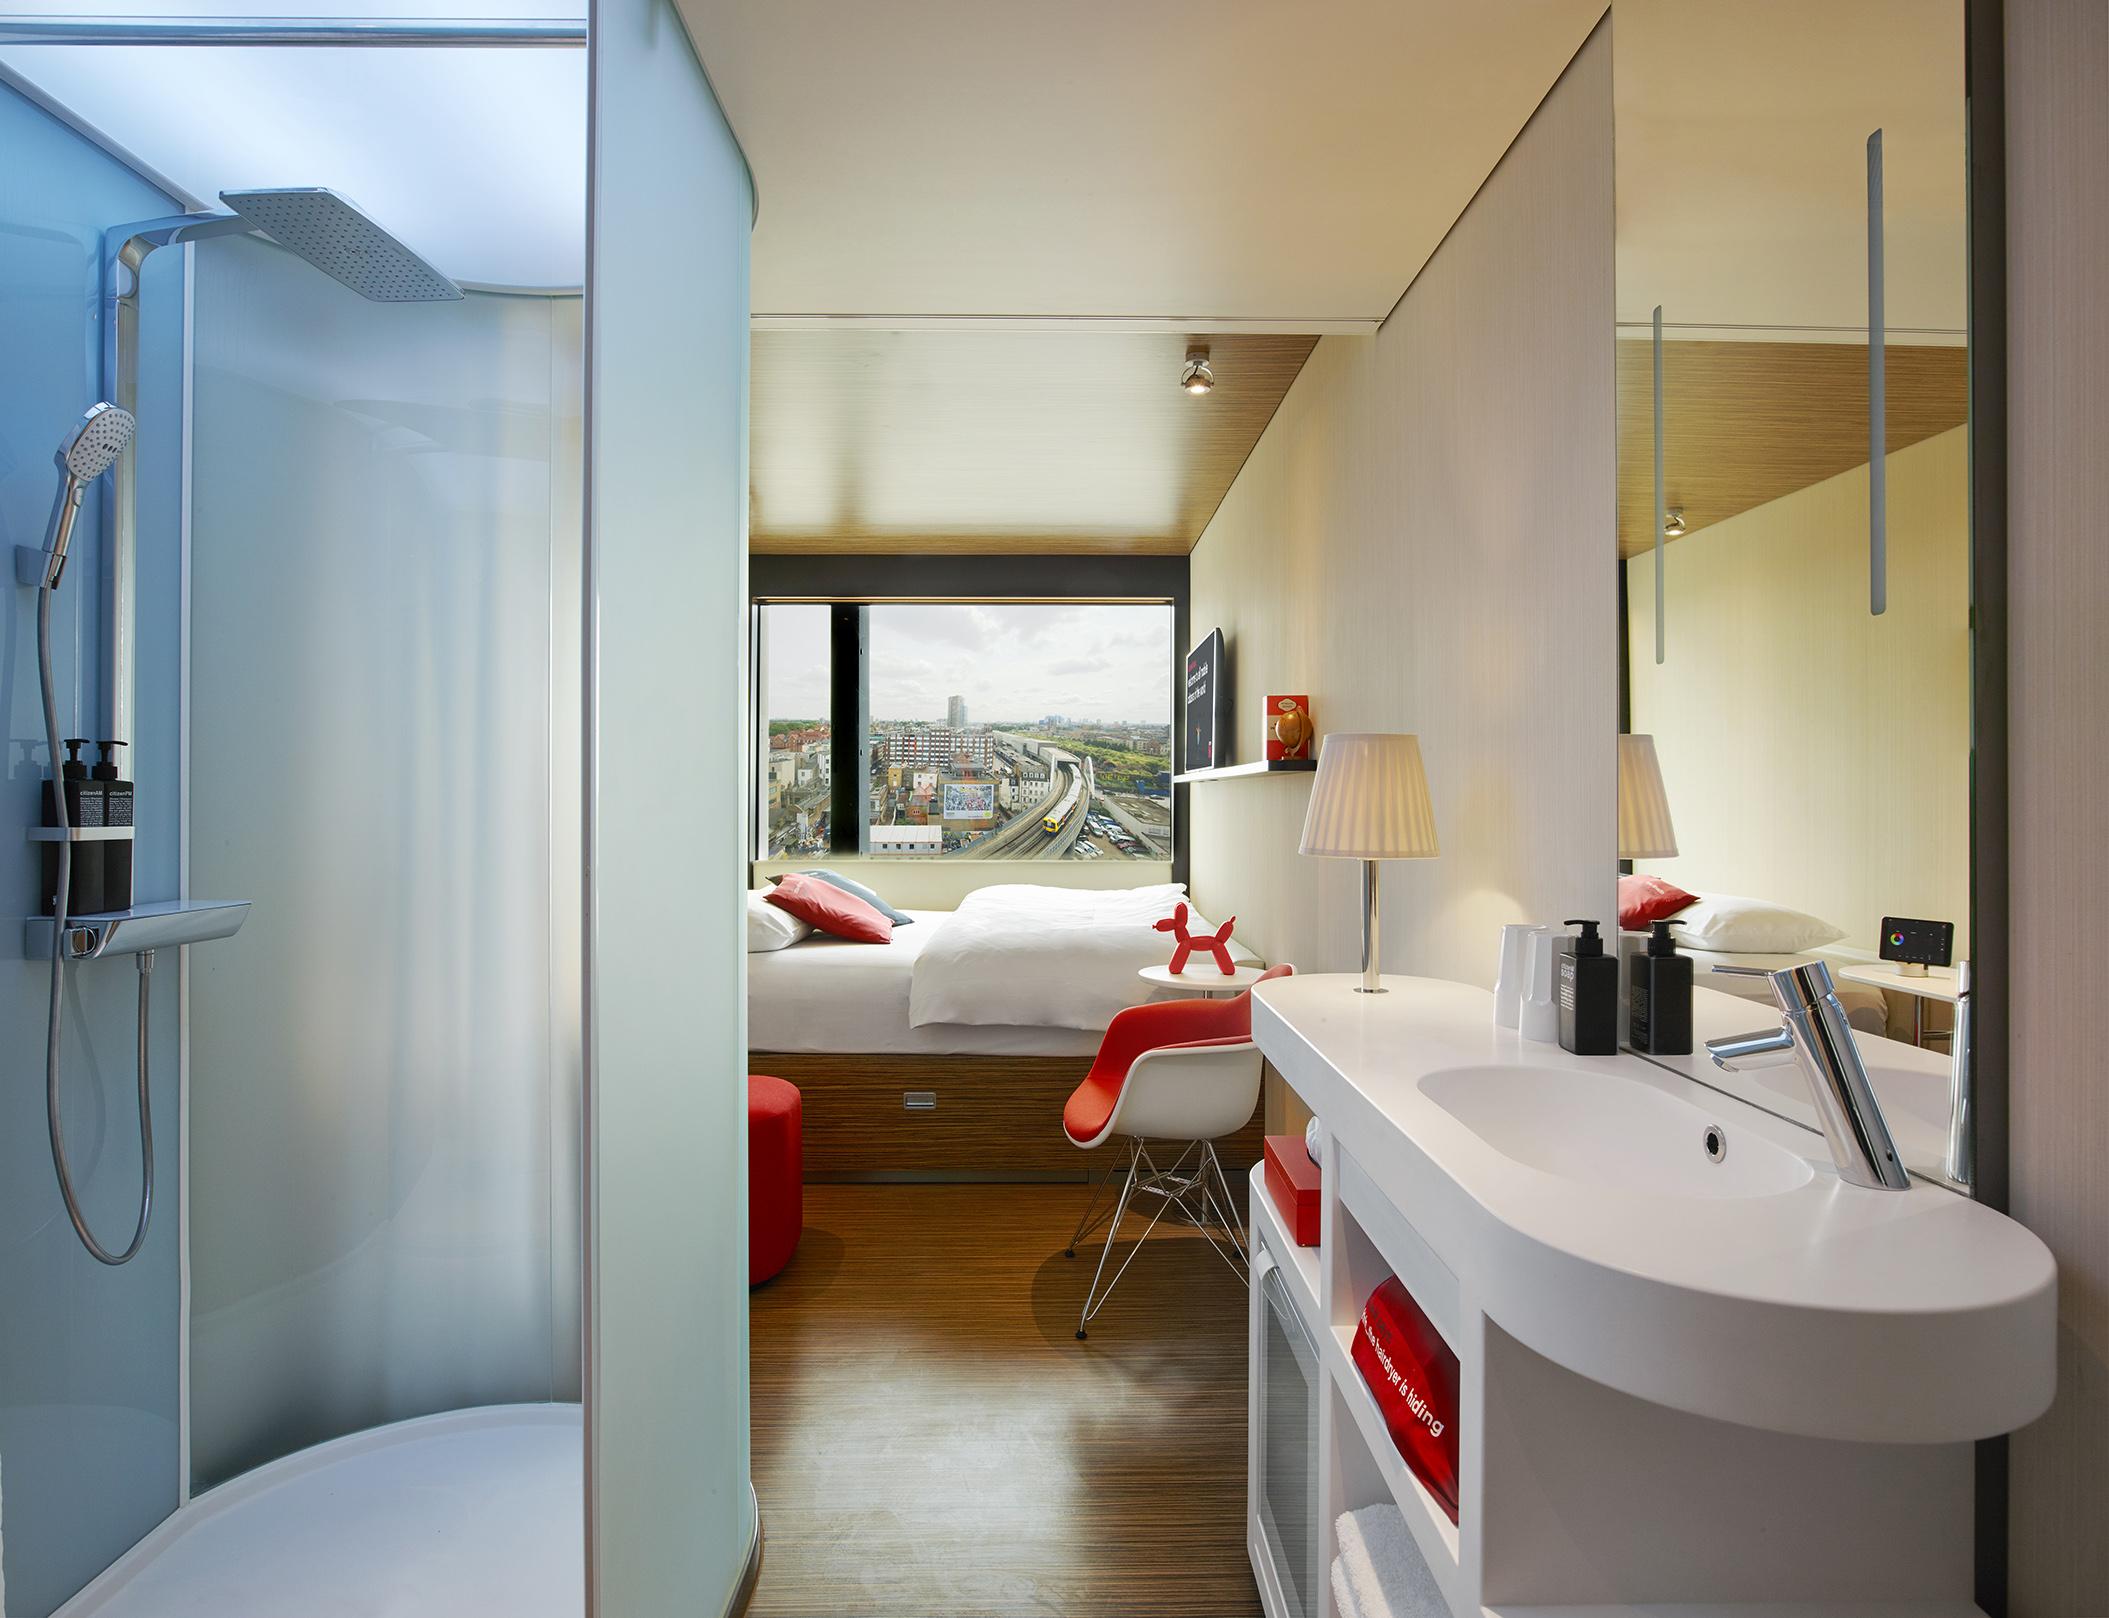 Mini-room, king-size bed: watch out for that bathroom if you’re sharing (citizenM)